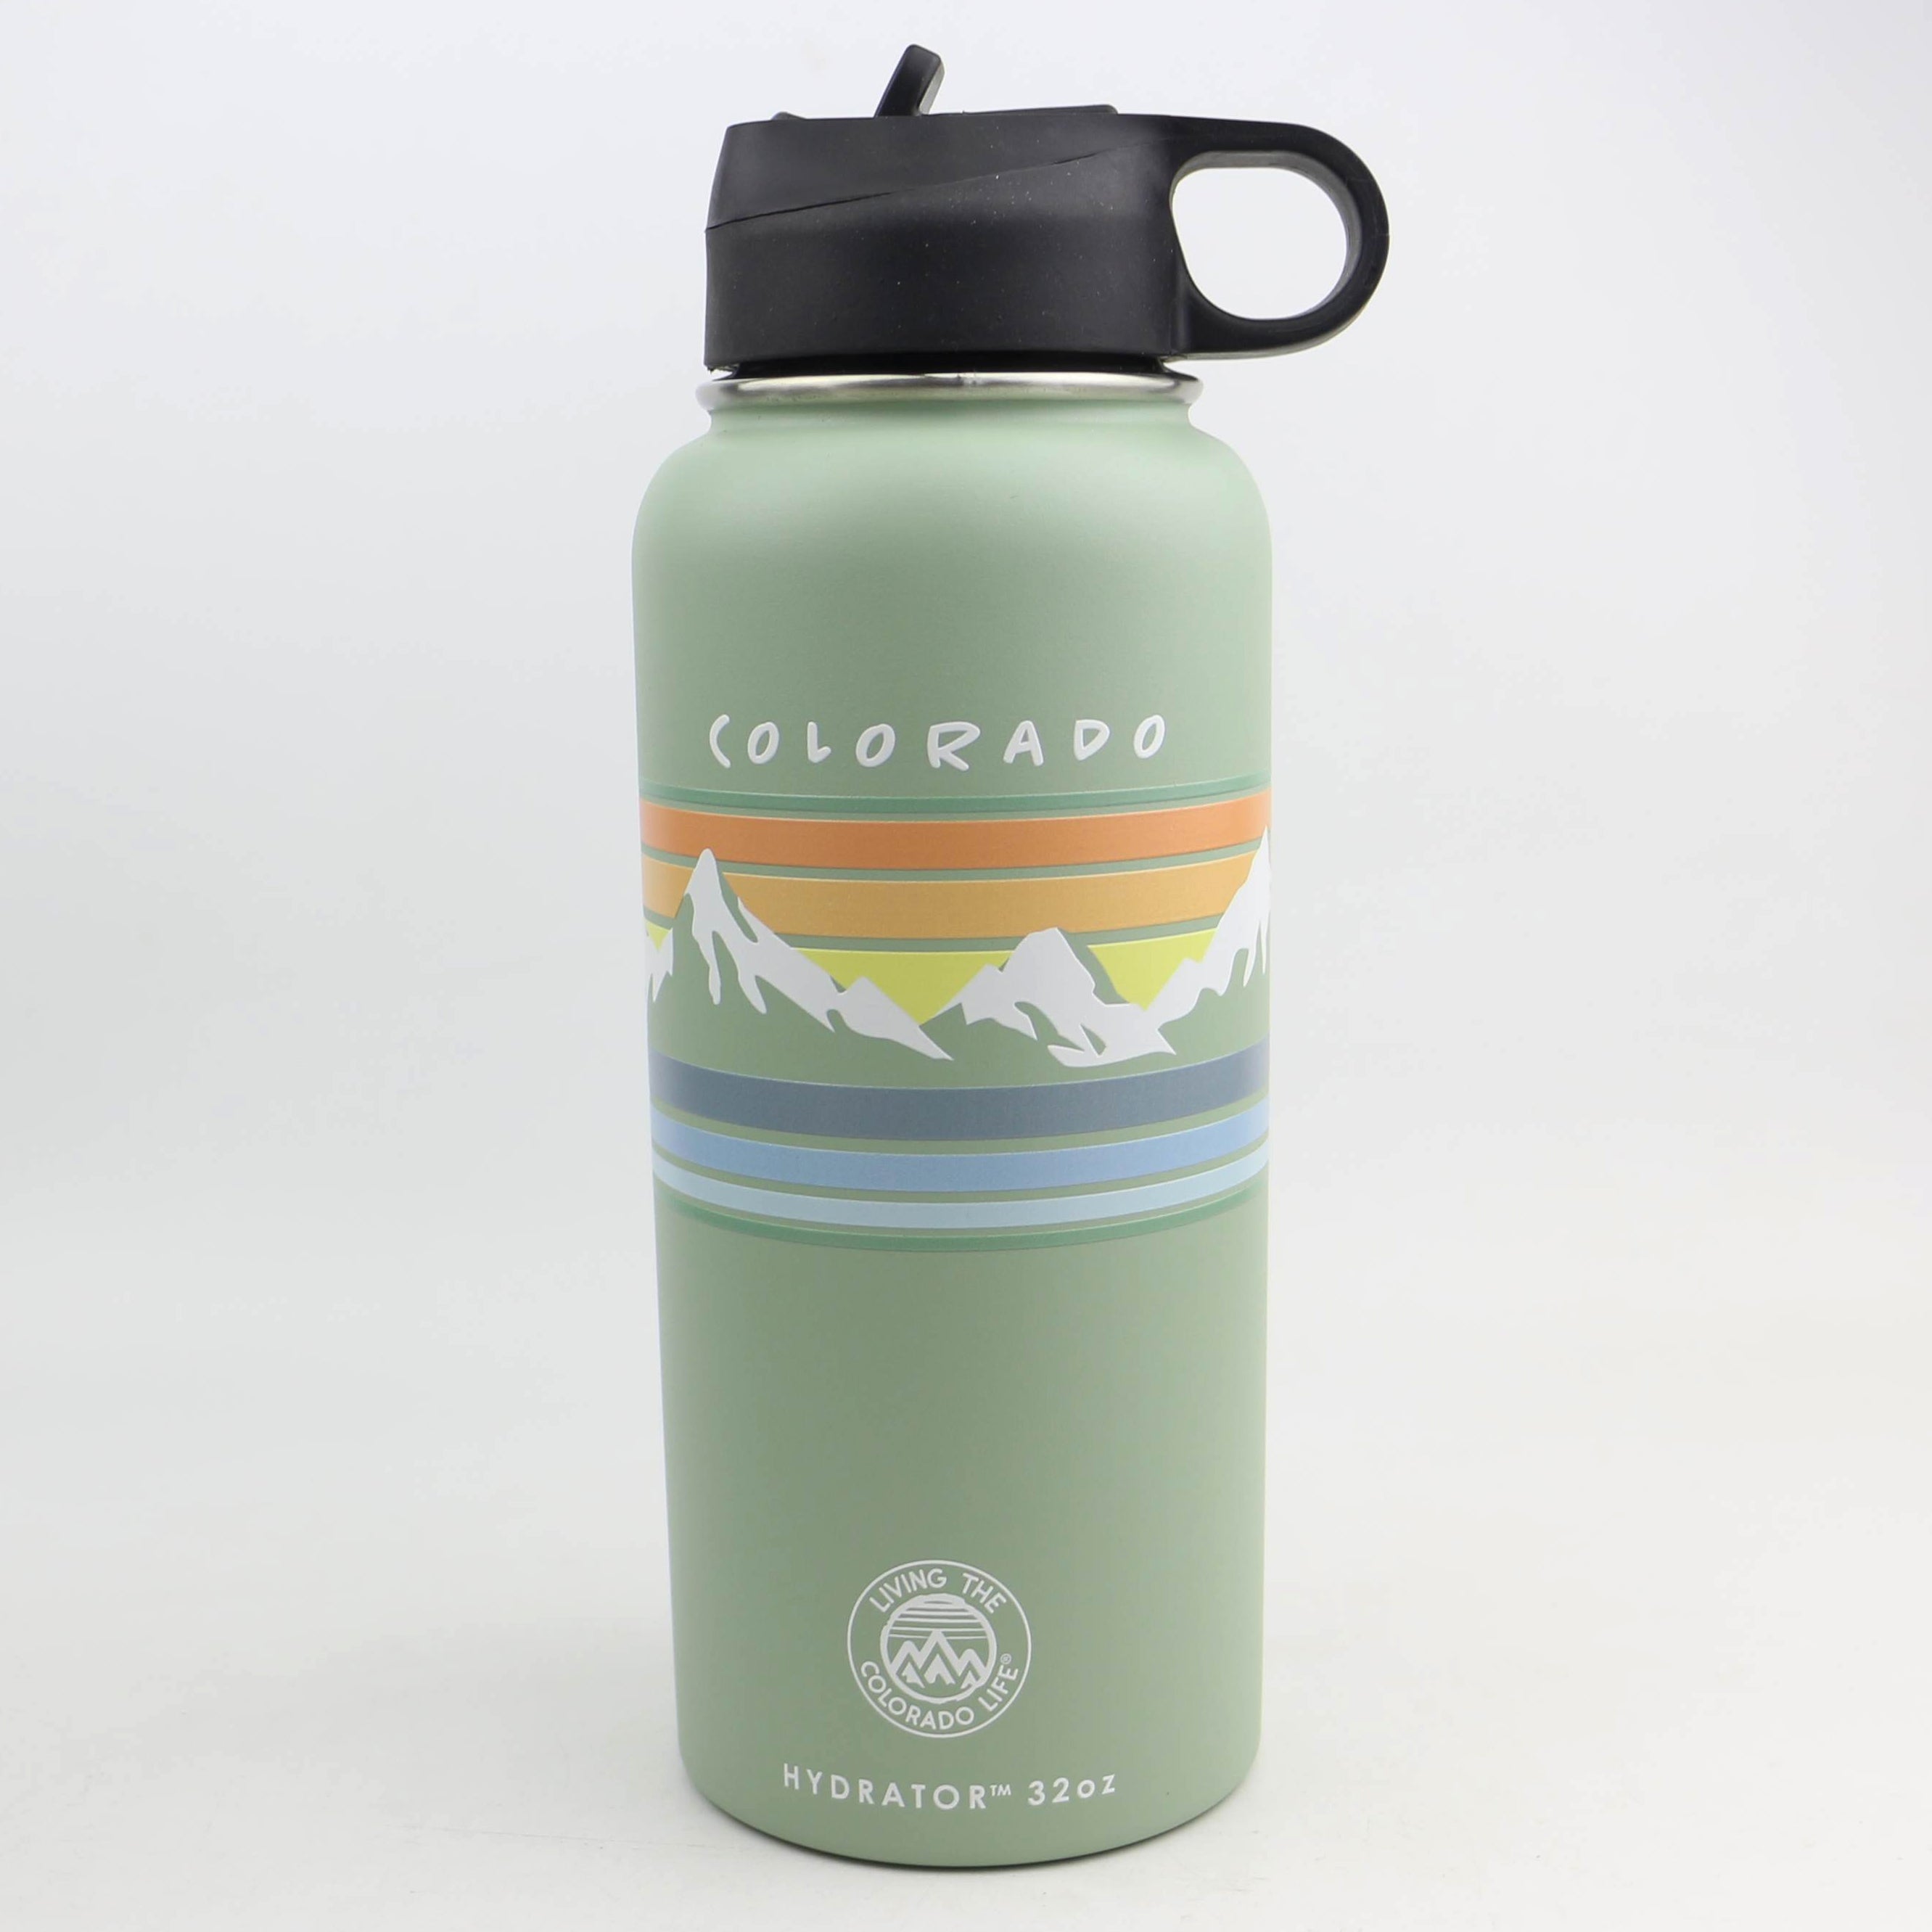 Cheetah Life-32oz Water Bottle Insulated - BBteamshop